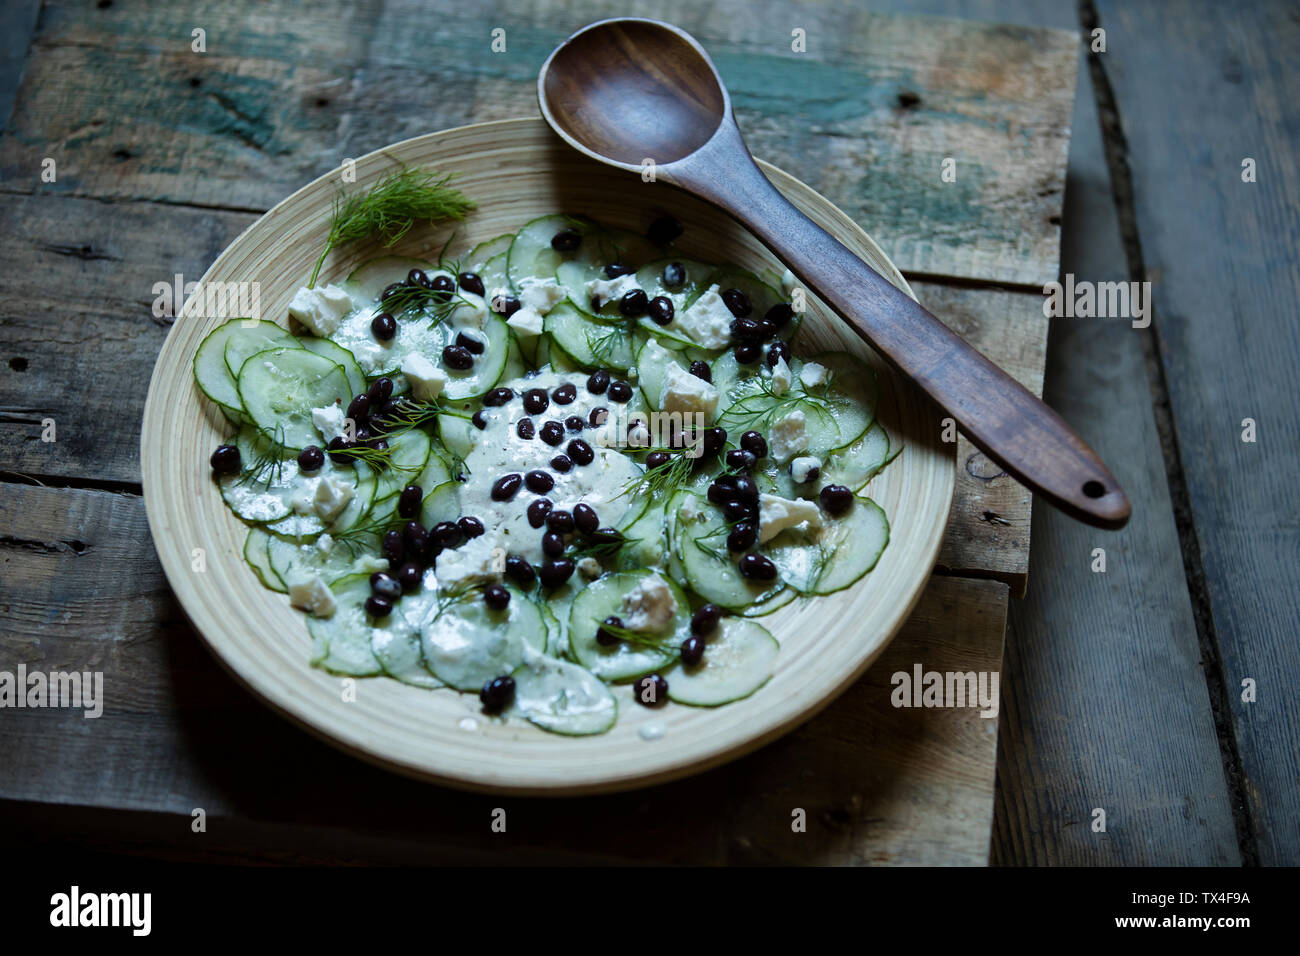 ucumber salad with black beans, sheep cheese, dill Stock Photo